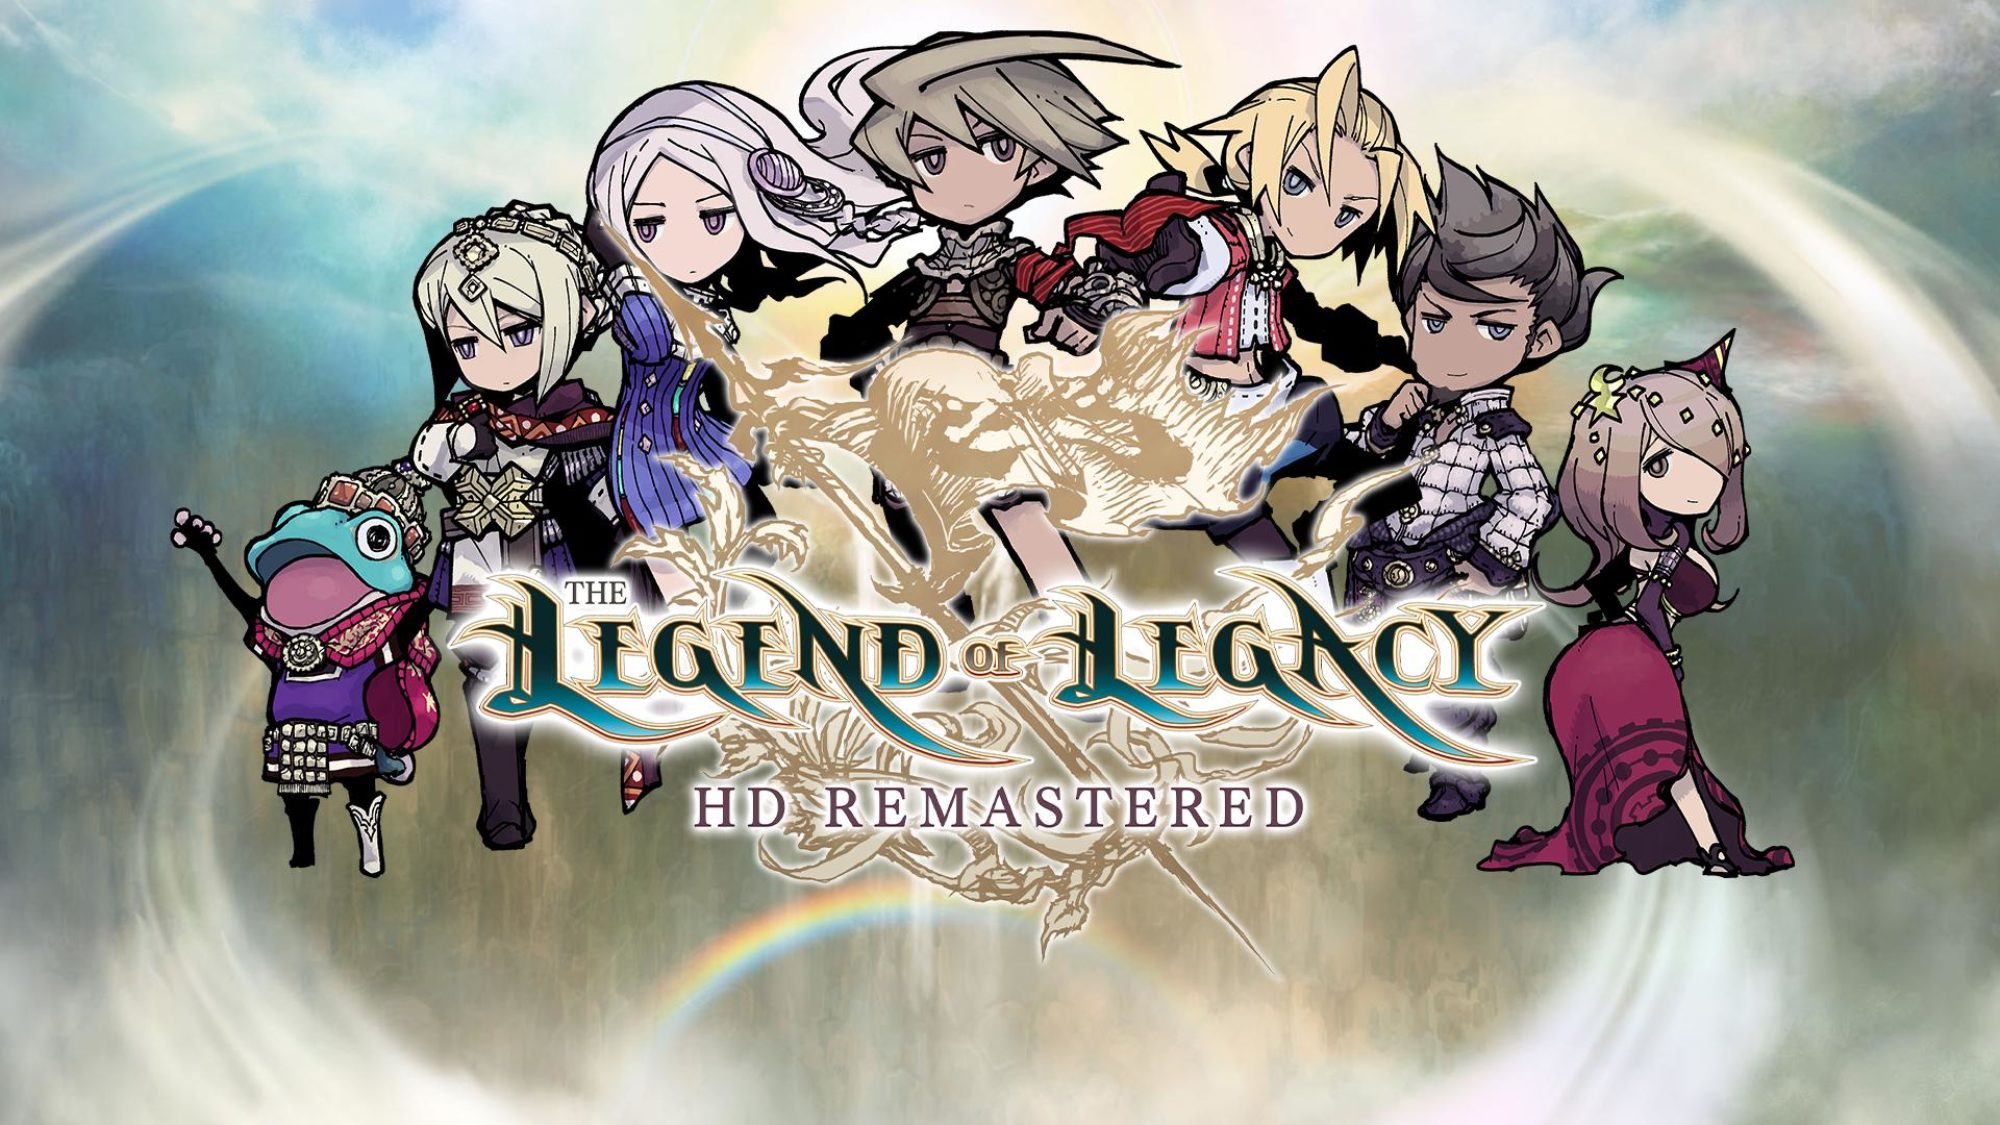 The Legend Of Legacy HD Remastered Gets New Gameplay Trailer